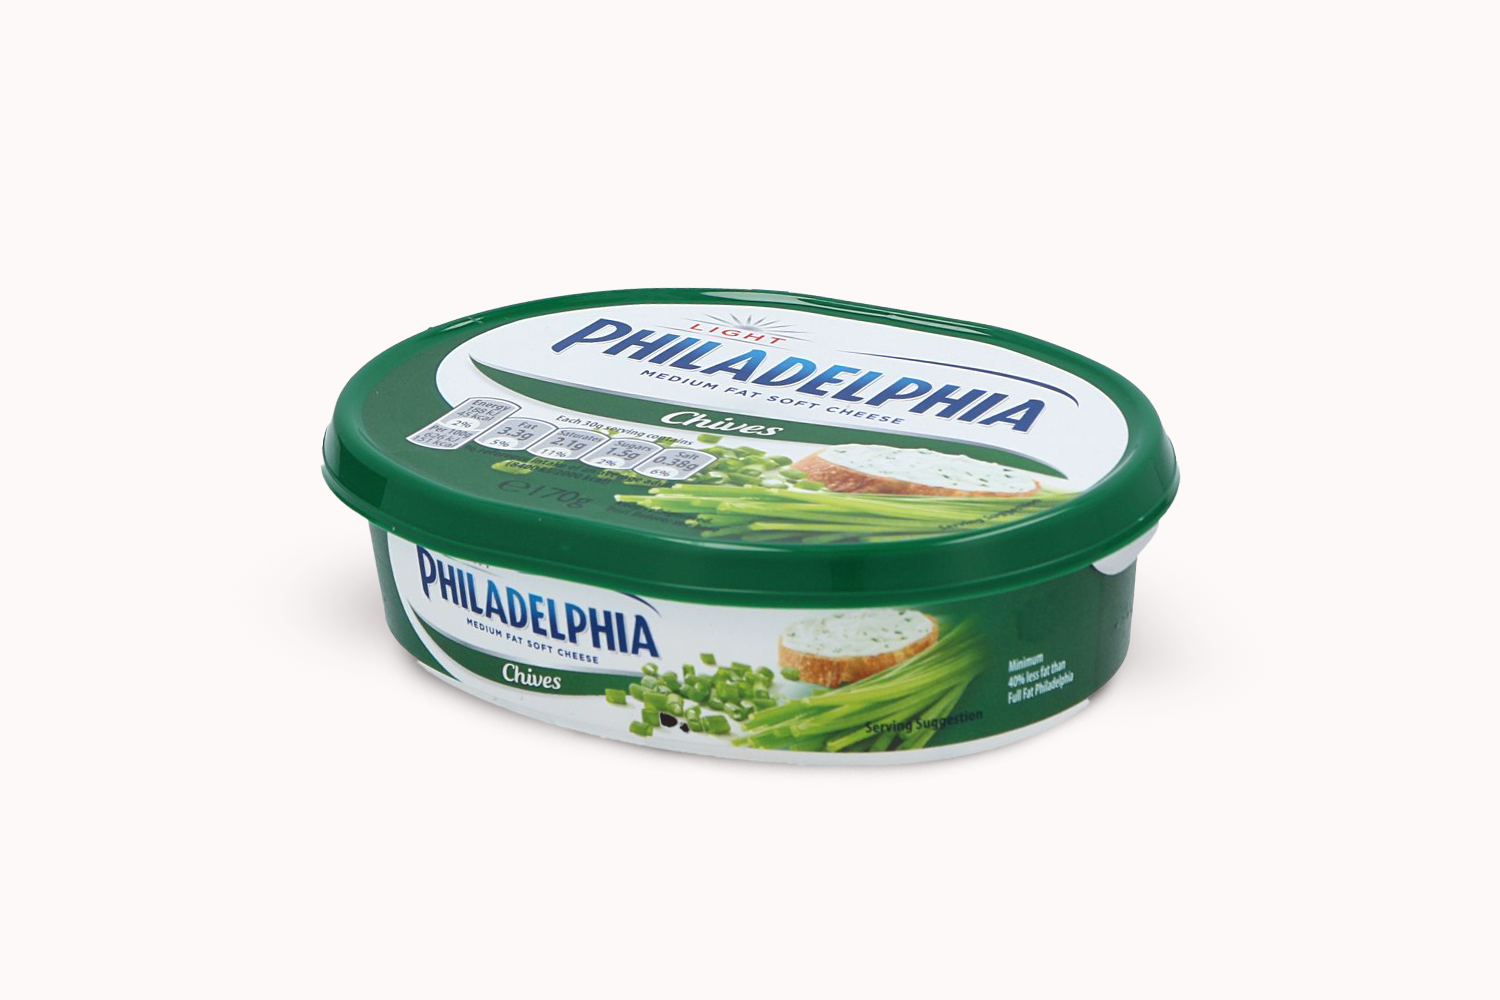 Kraft Philadelphia Soft Cheese With Chives